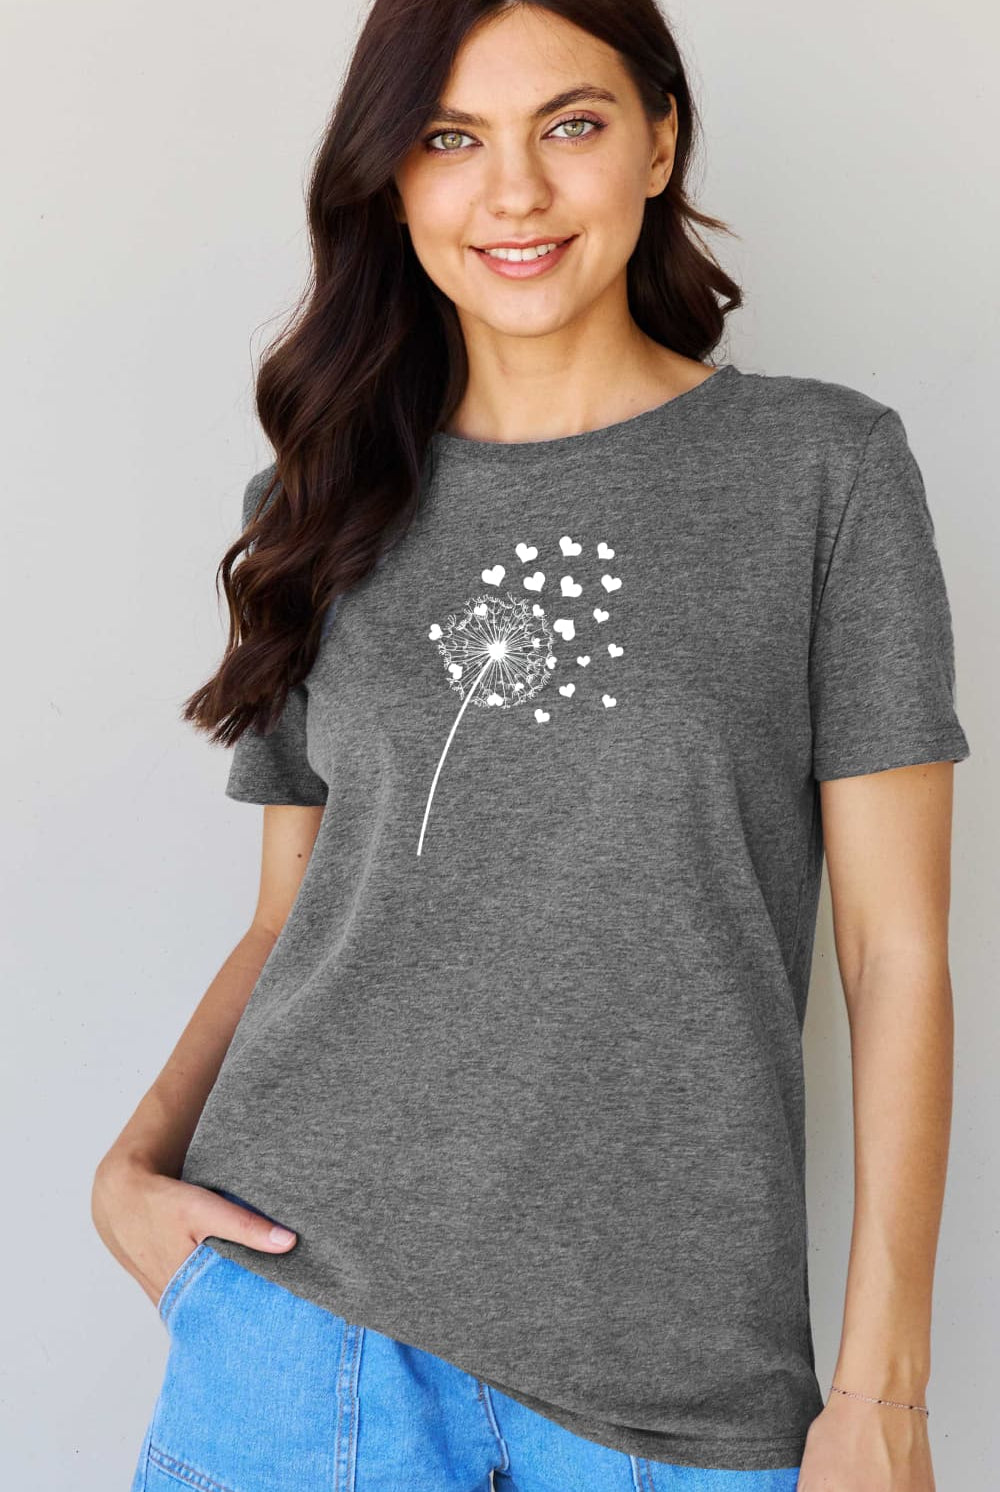 Gray Simply Love Full Size Dandelion Heart Graphic Cotton T-Shirt Graphic Tees